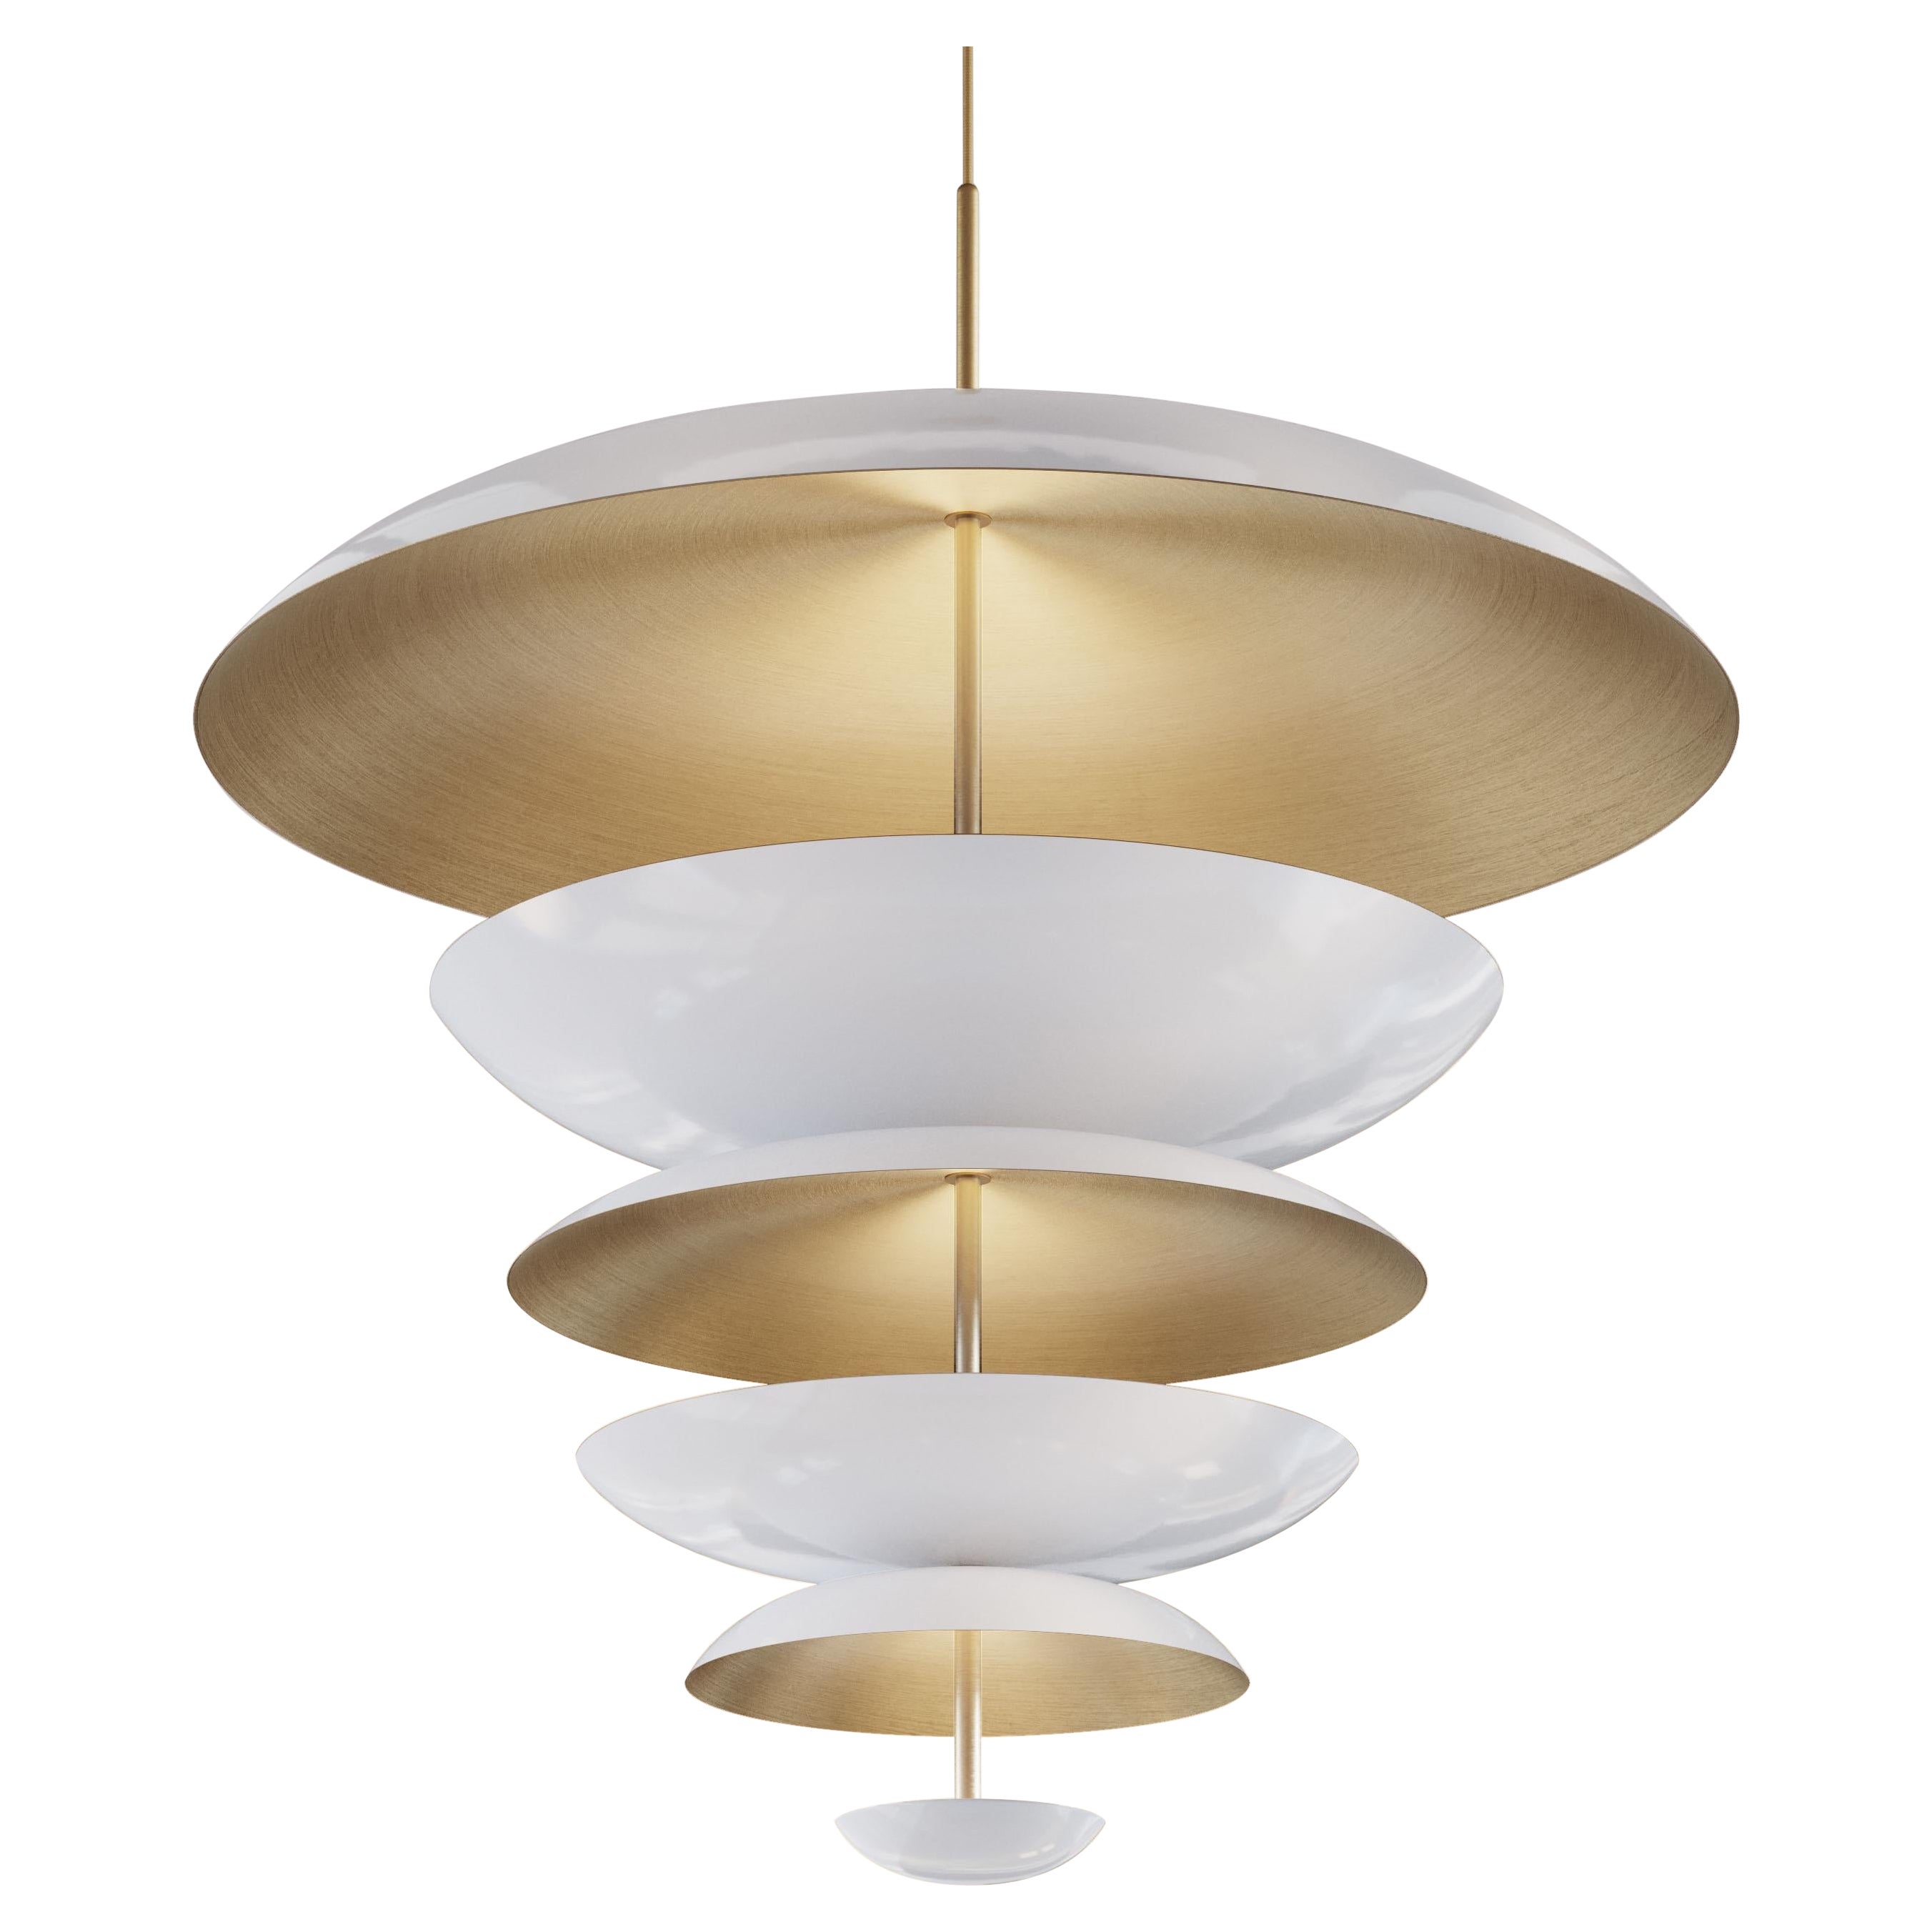 'Cosmic Purion' Chandelier XL 70' White Lacquered Brass Pendant, Ceiling Lamp